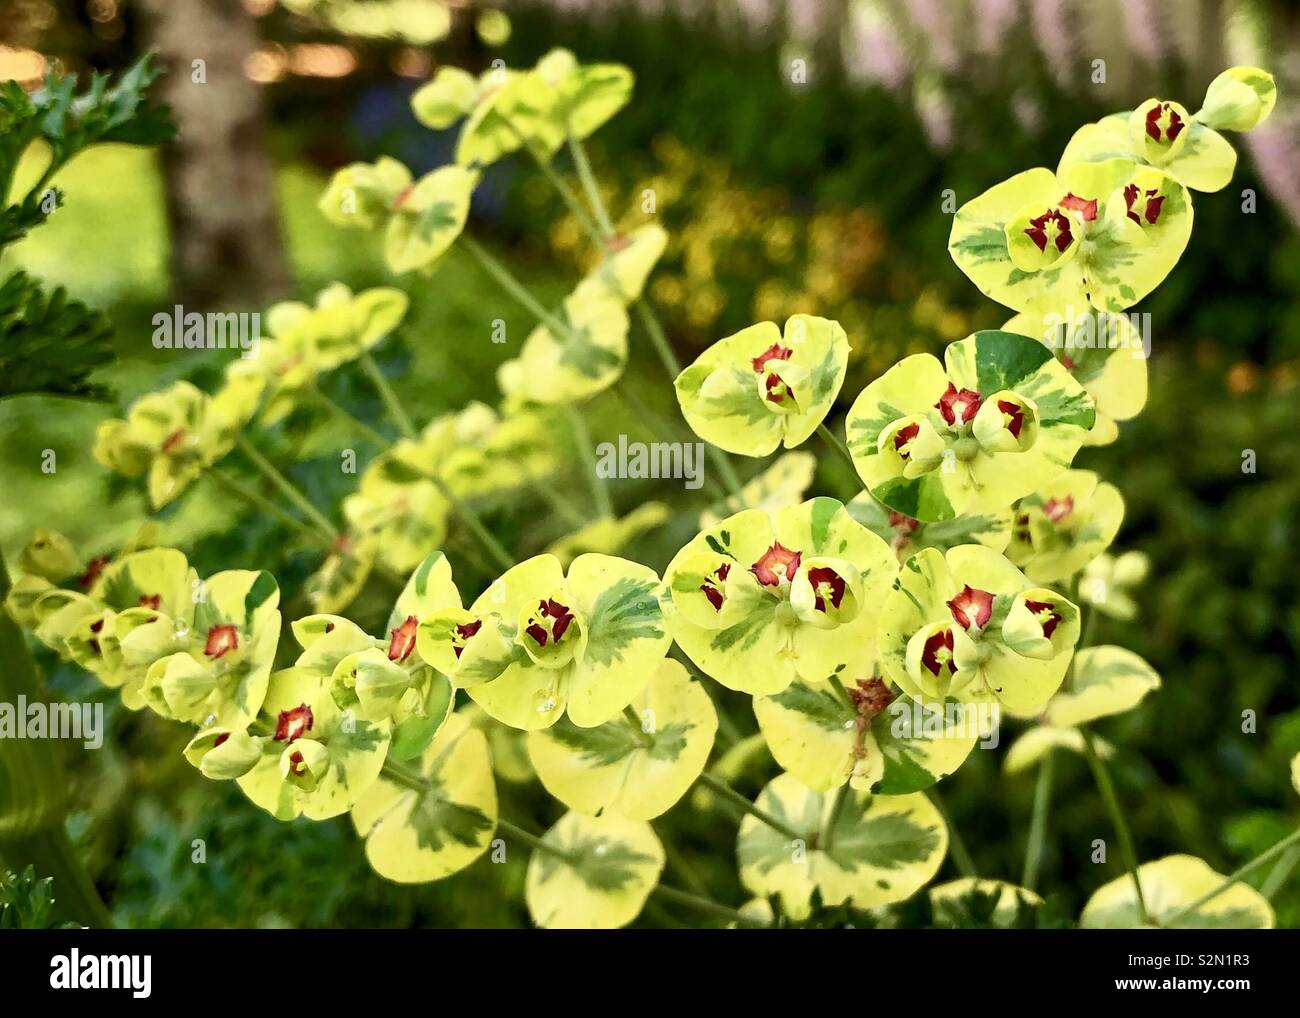 Large cluster of yellow/green flowers with red centers Stock Photo